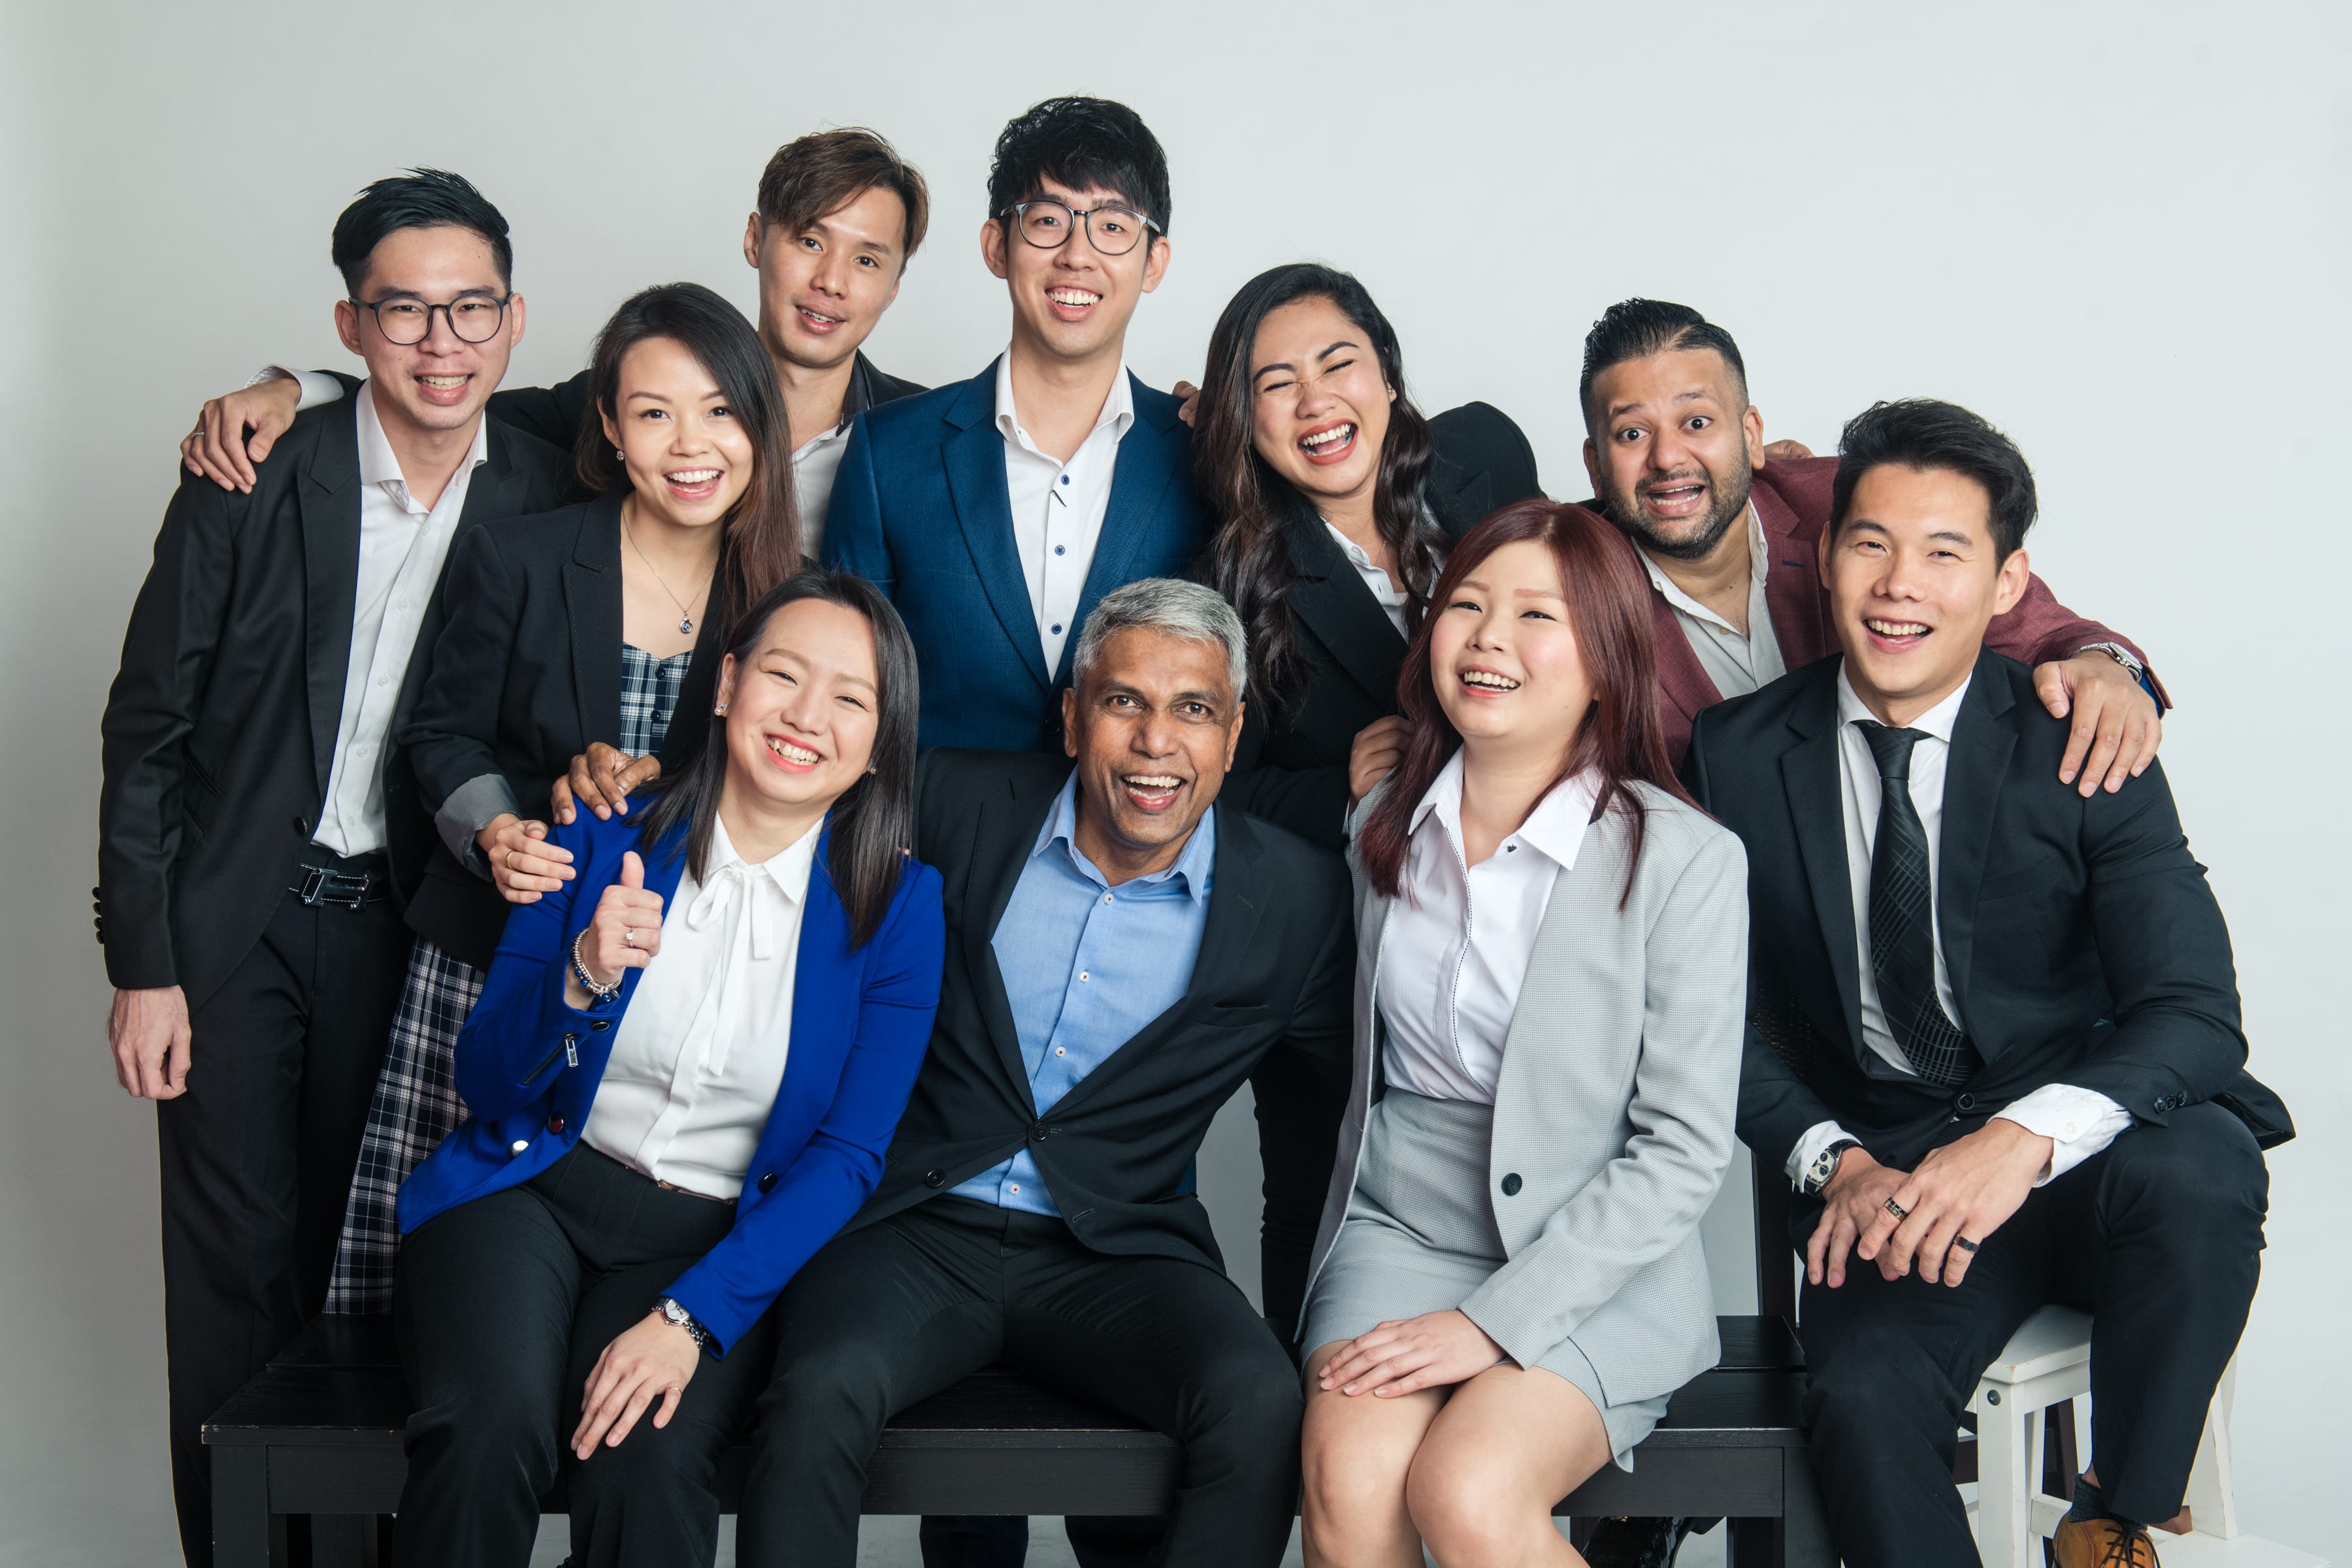 A group photo of business professionals smiling together with their arms around each other's shoulders during a corporate photoshoot in Singapore Credit: White Room Studio